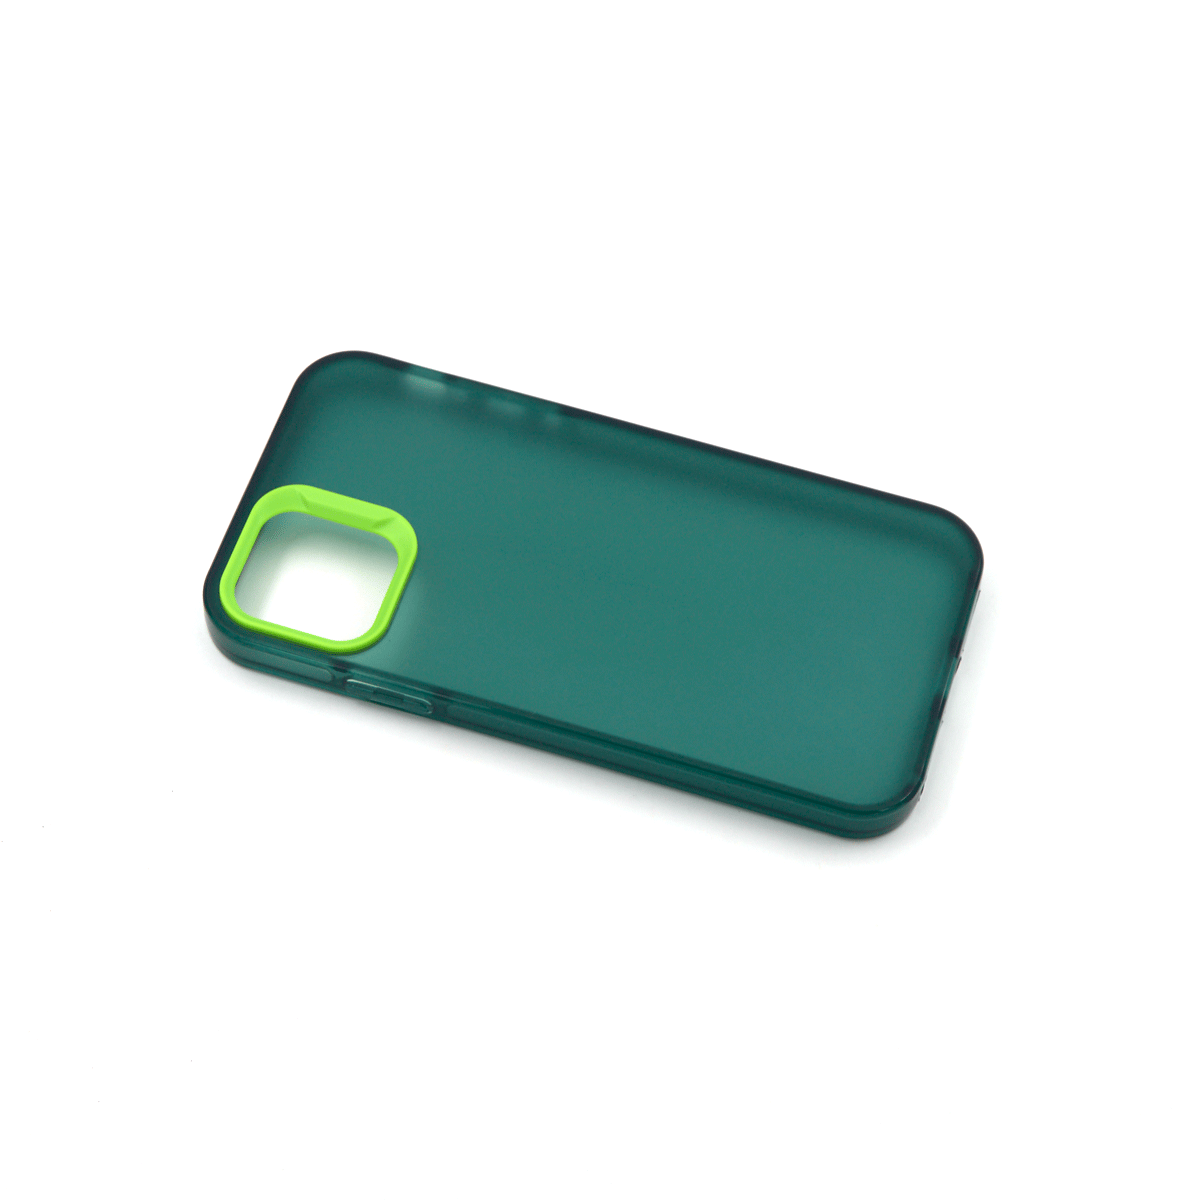 Tpu cool color for iphone 11 (6.1") green